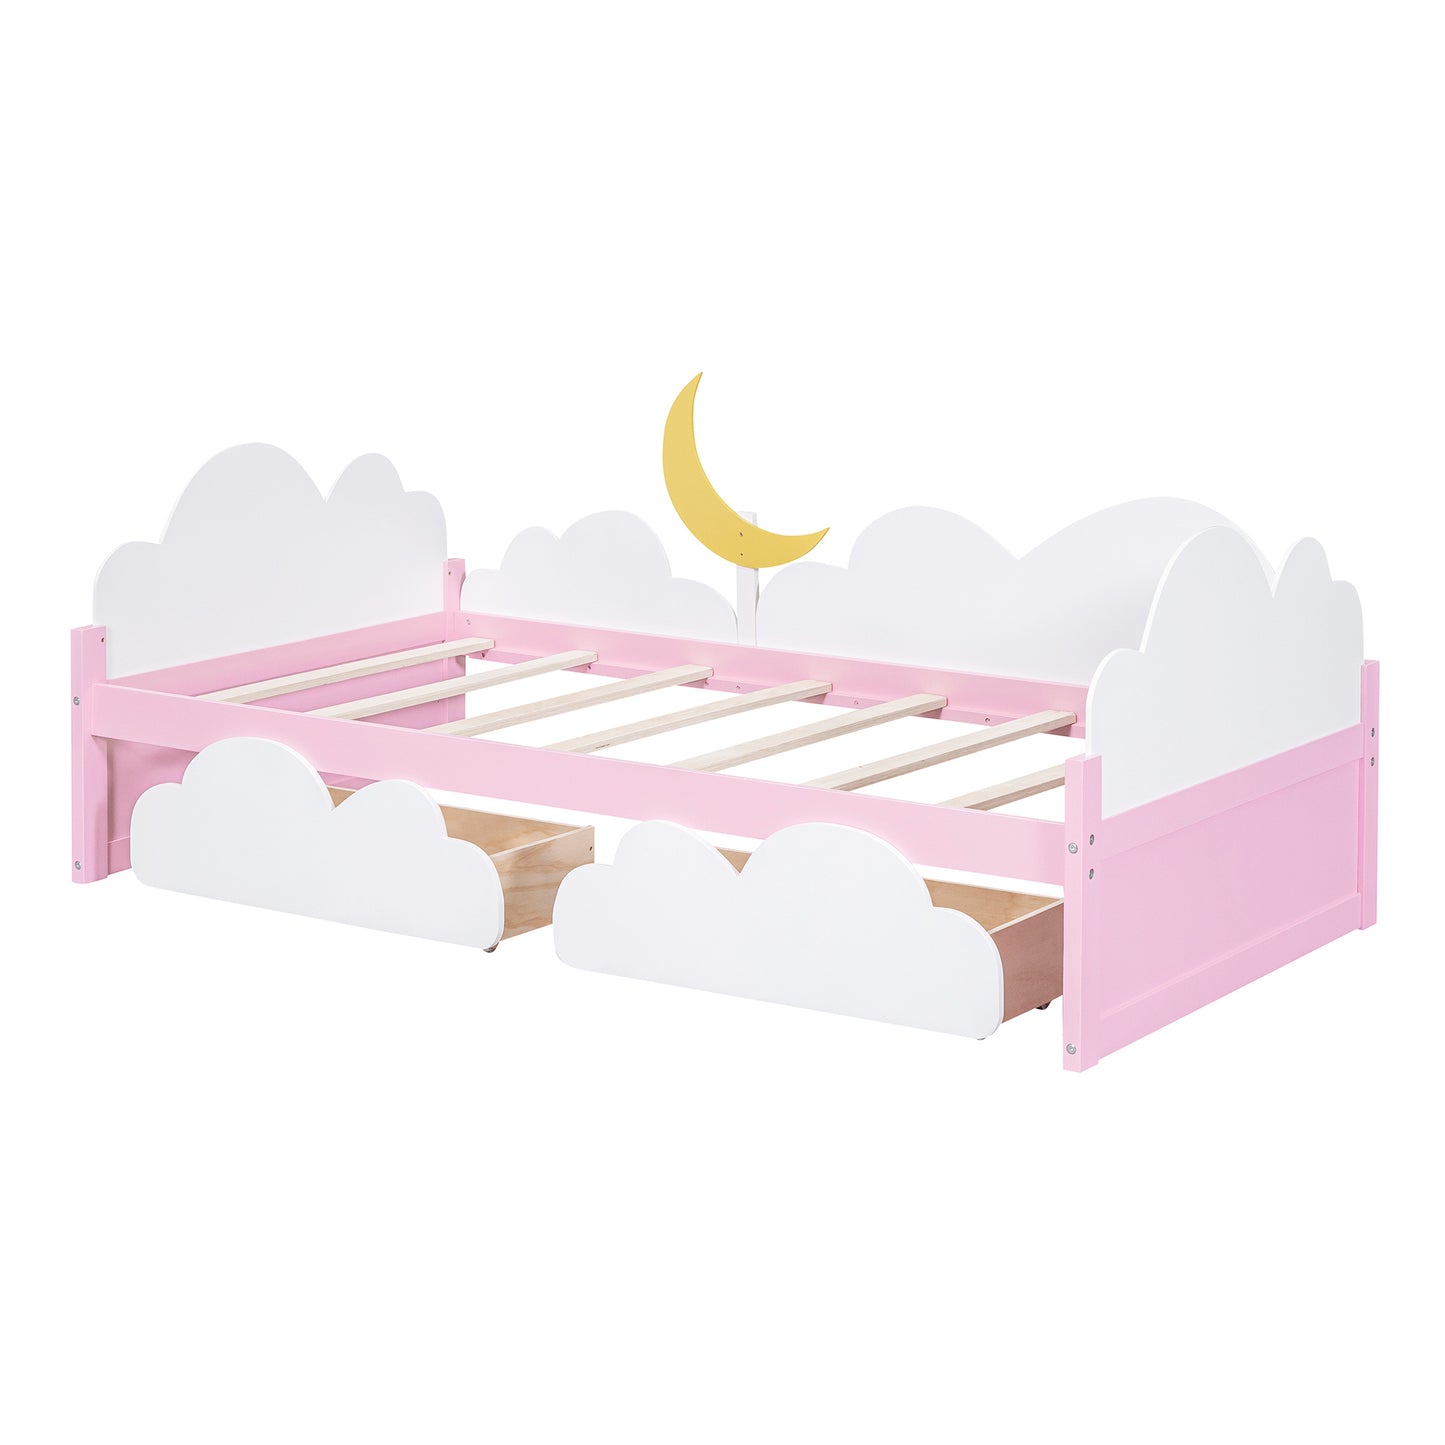 Twin Size Bed with Moon Decor, Platform Bed with 2 Drawers (White+Pink)